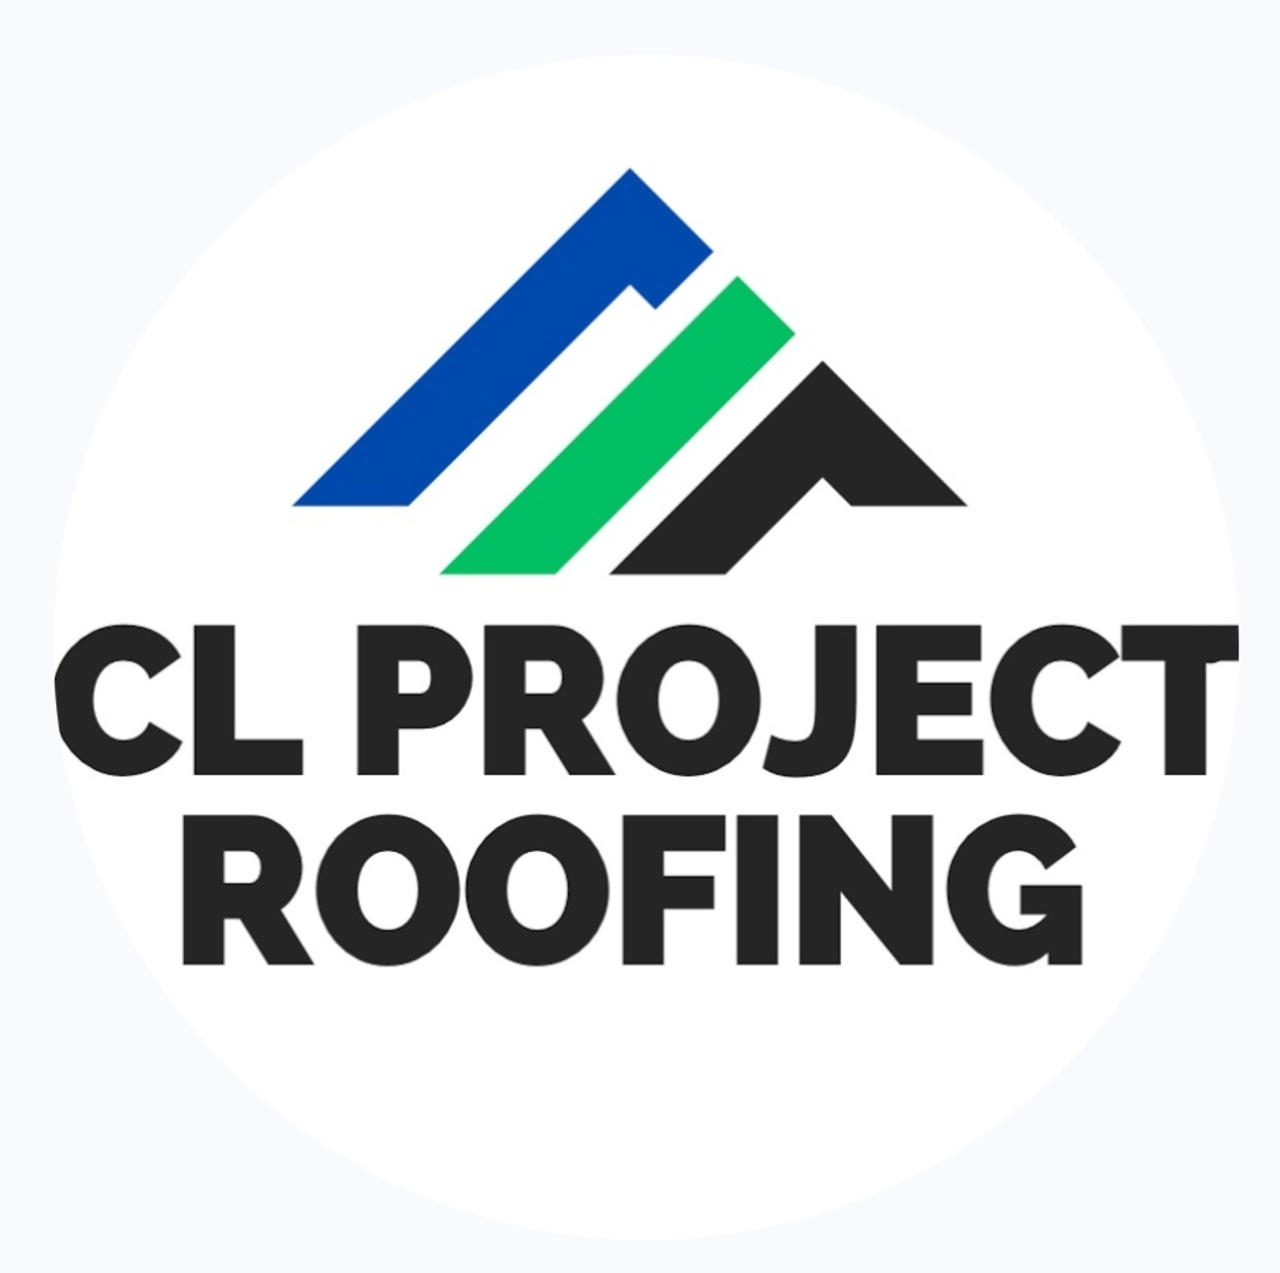 CL Project Roofing's logo